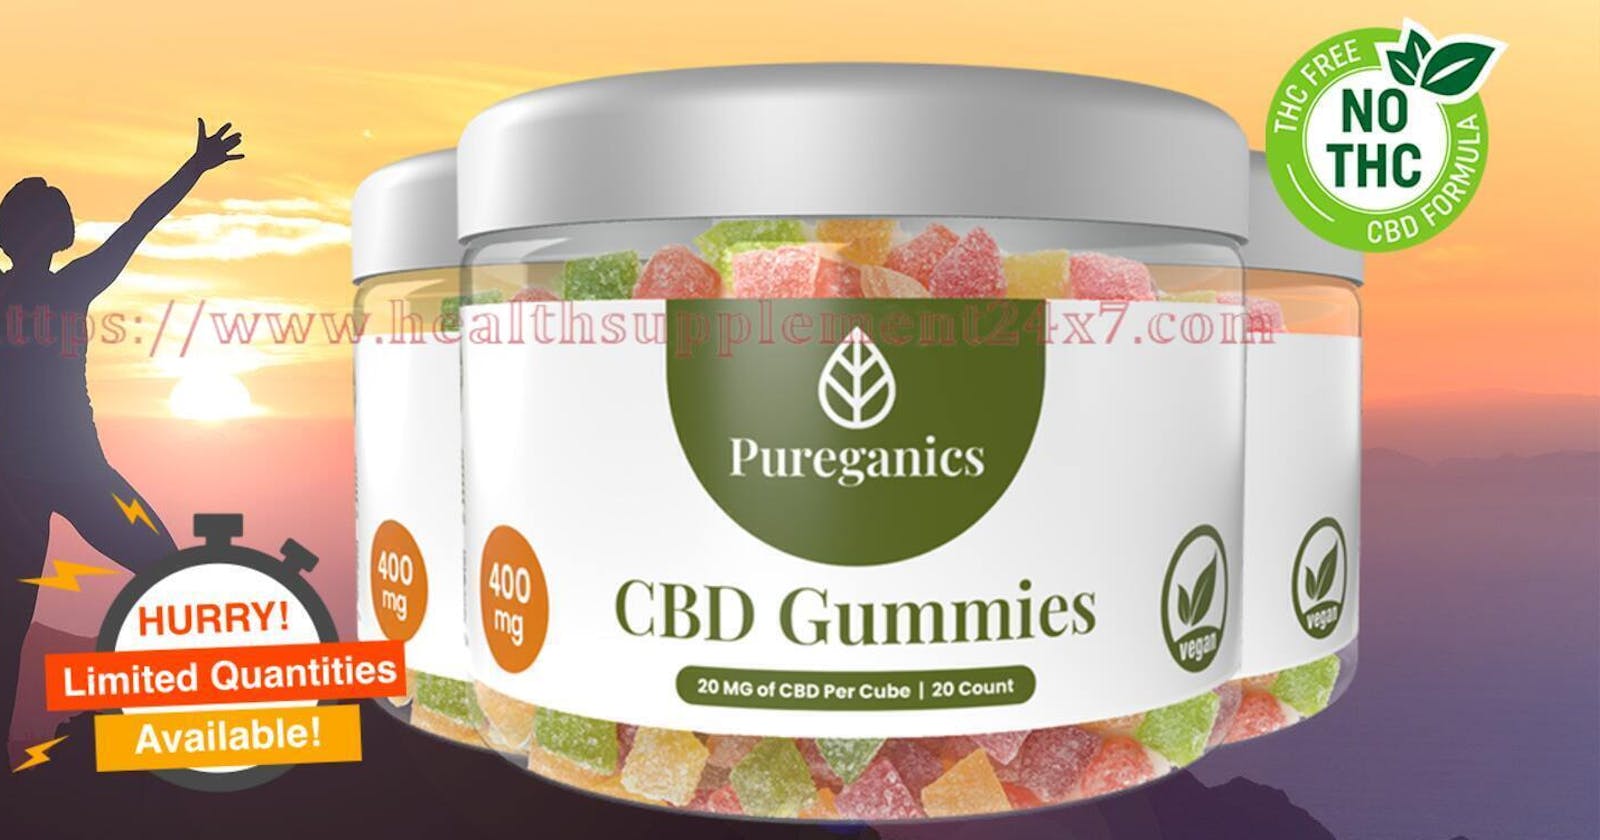 Pureganics CBD Gummies Safe, Non-Habit Forming, Effective and 100% Legal Relieves Anxiety & Stresss(Work Or Hoax)